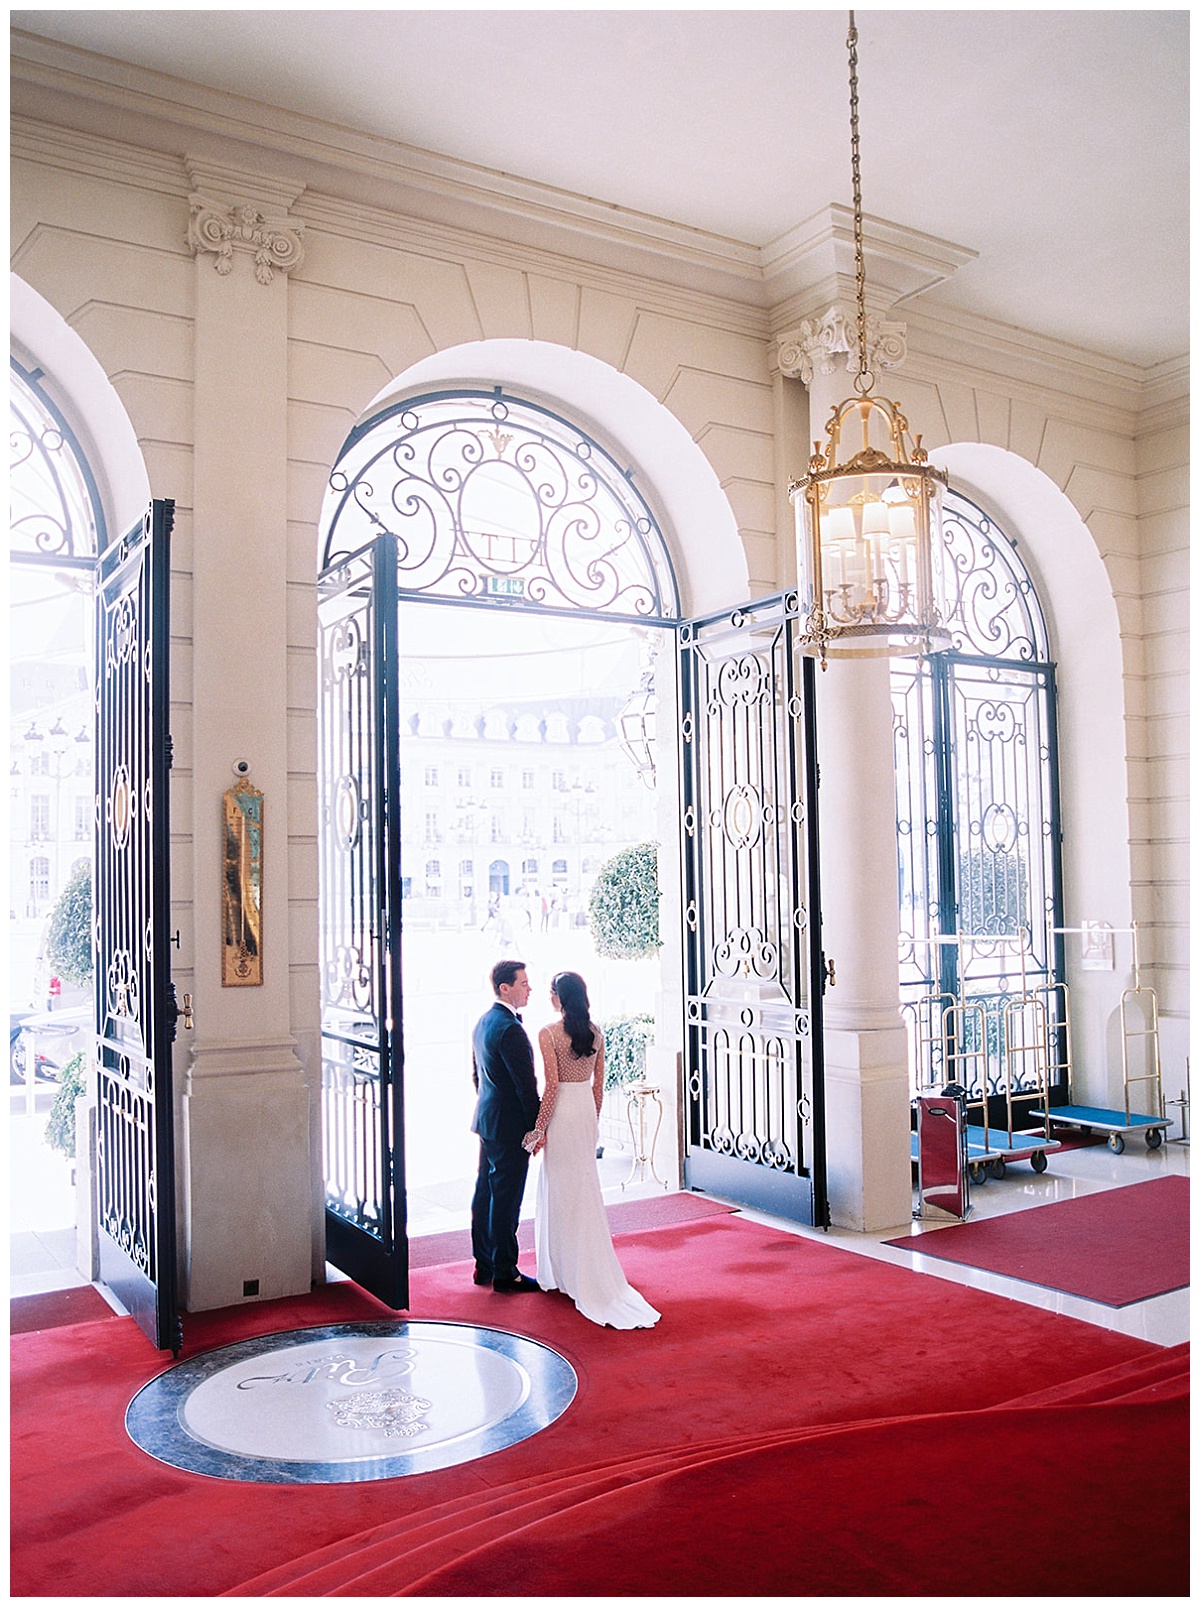 The bride and groom in the entrance of the ritz